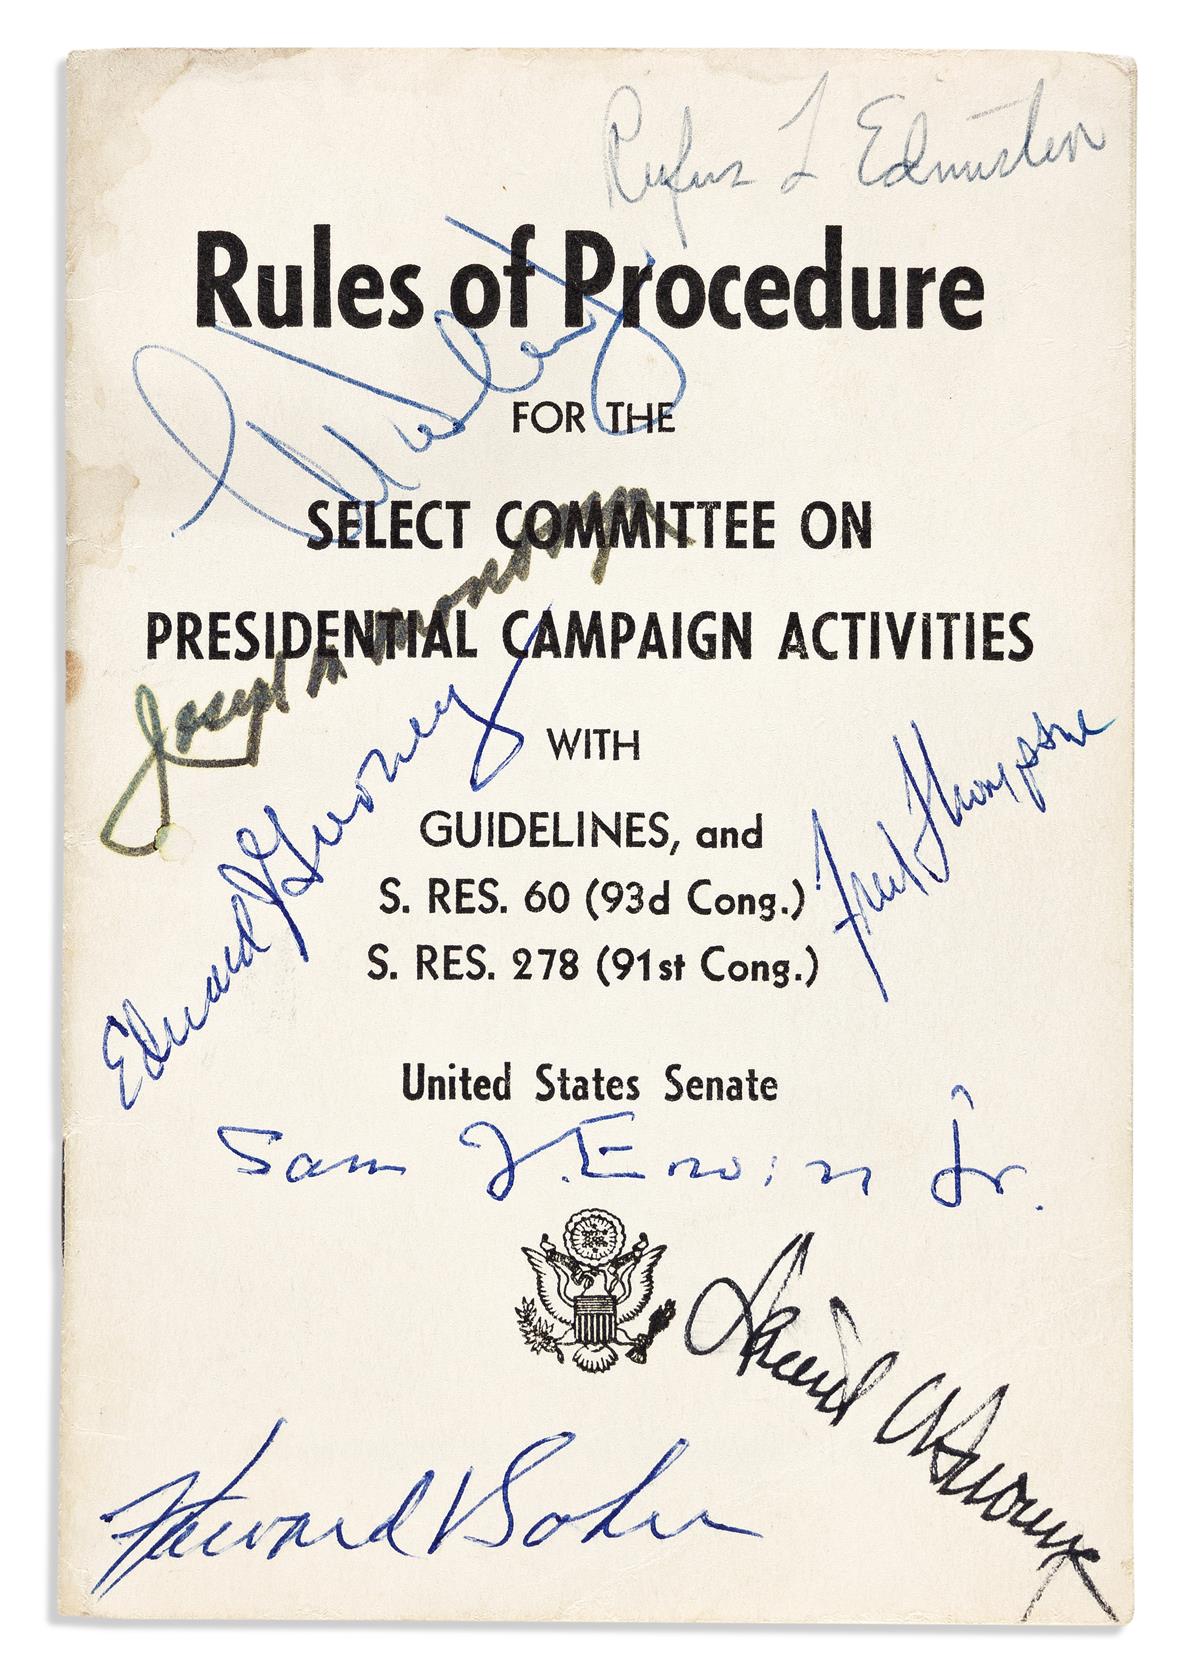 (WATERGATE.) Rules of Procedure for the Select Committee on Presidential Campaign Activities Signed by each member of the Committee